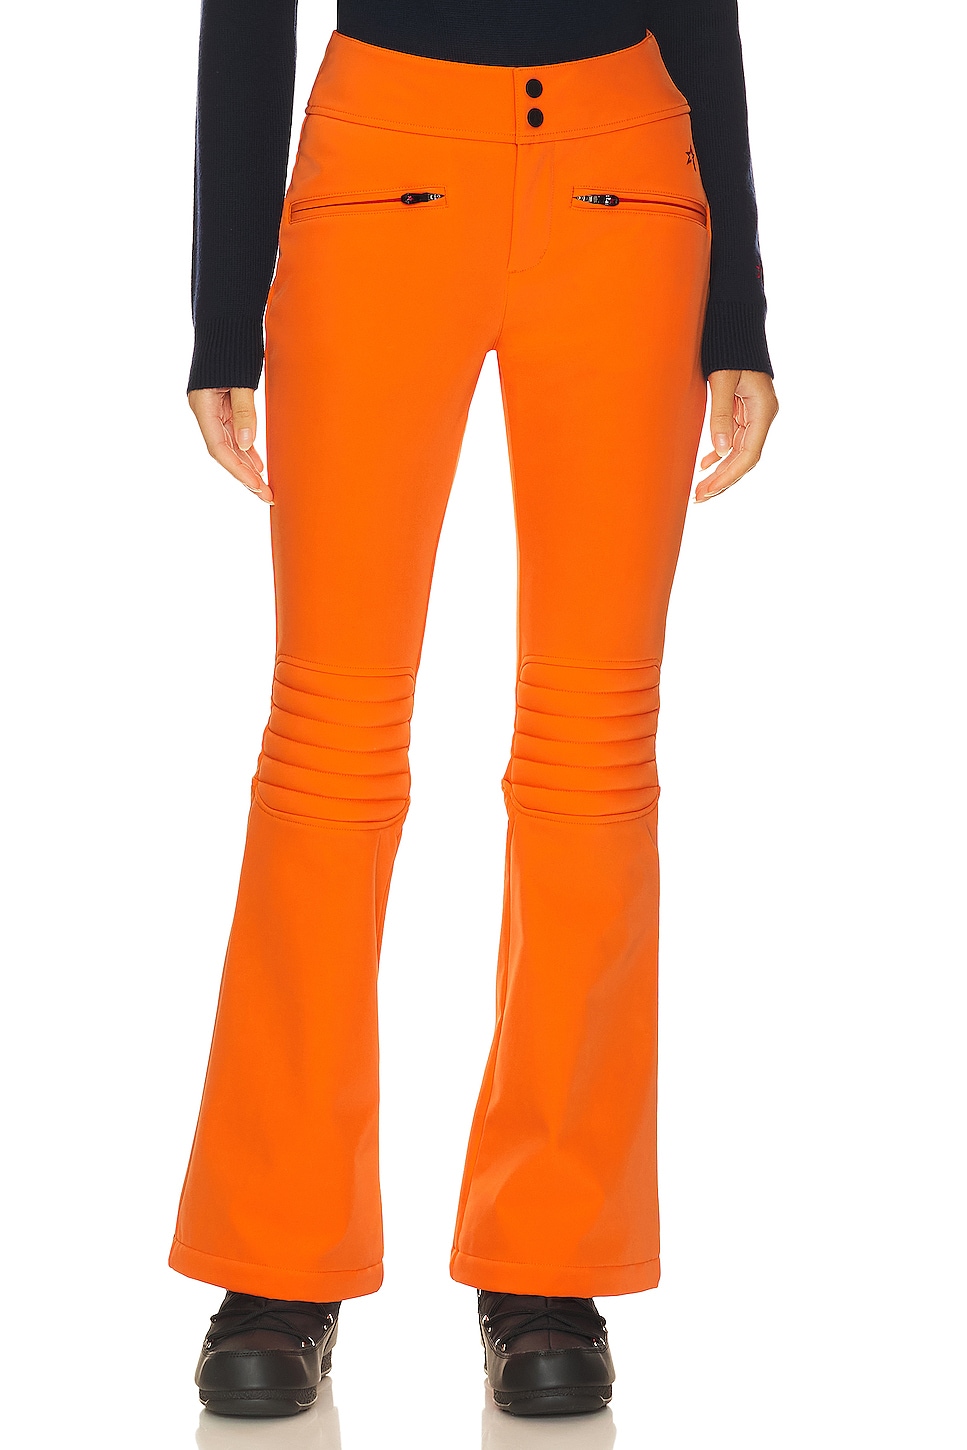 Perfect Moment Aurora Flare Race Pant in Red Orange